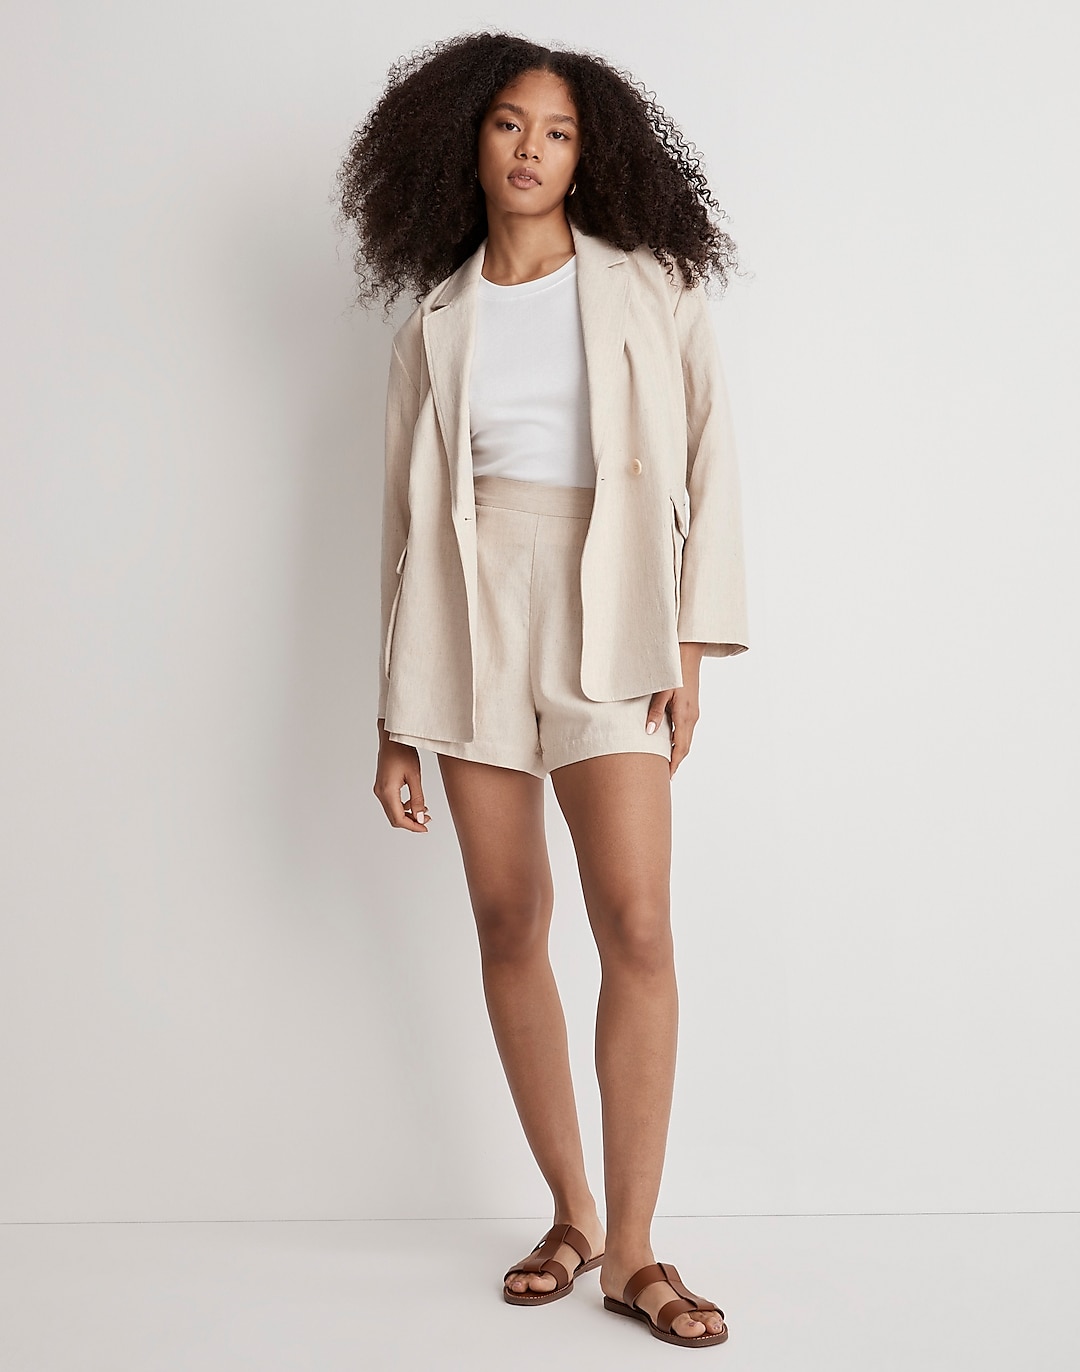 Clean Pull-On Shorts in Linen-Cotton | Madewell